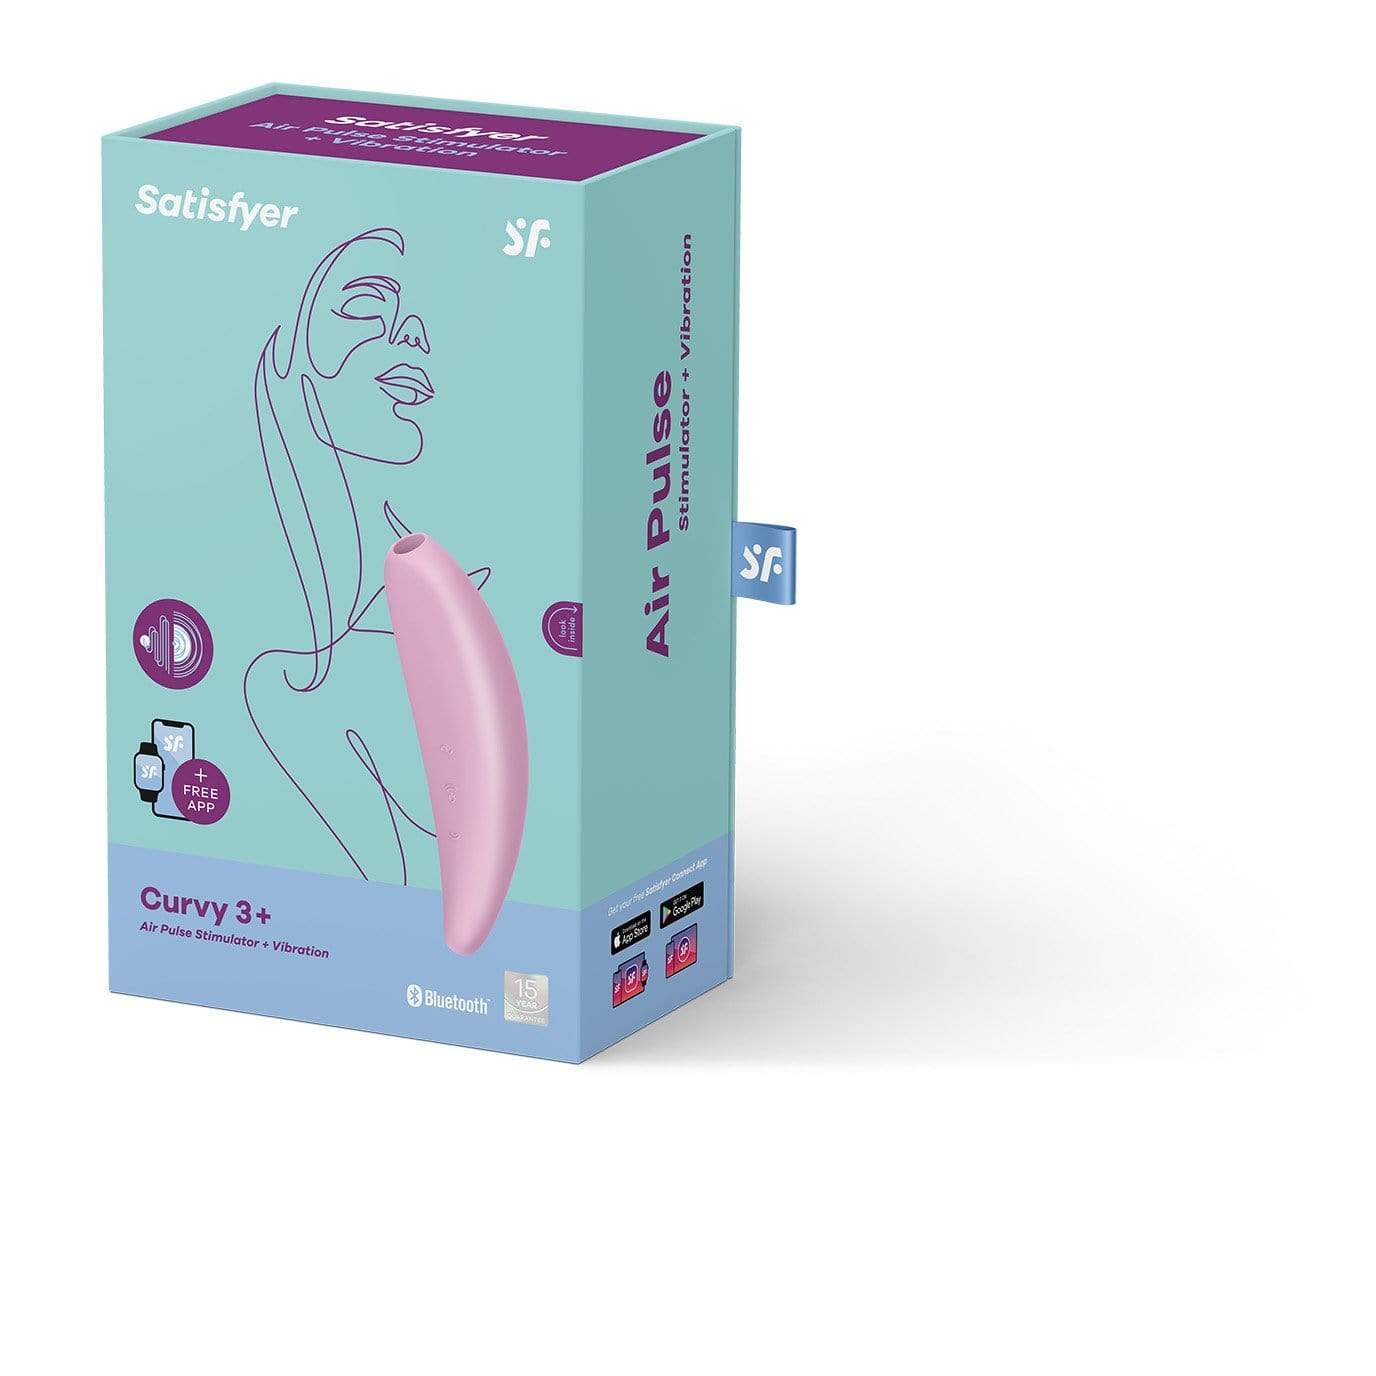 Satisfyer - Curvy 3+ App-Controlled Air Pulse Stimulator Vibrator (Pink) Clit Massager (Vibration) Rechargeable 289876916 CherryAffairs